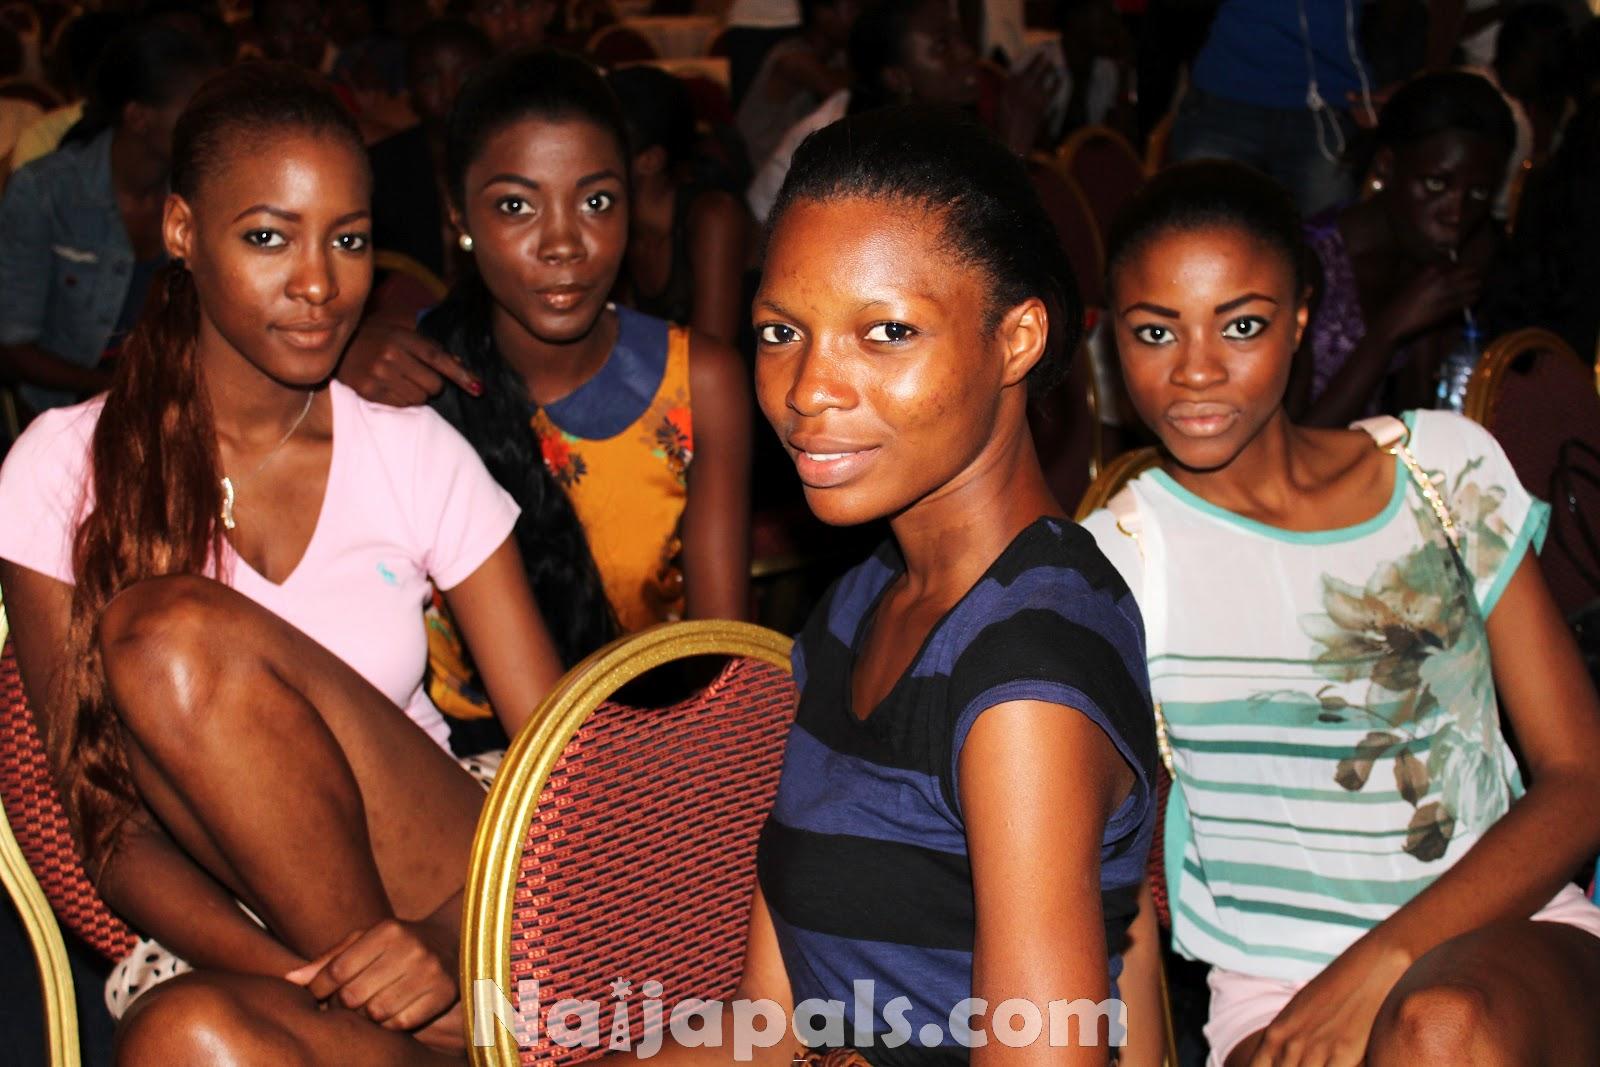 SOME OF THE MODELS BACKSTAGE